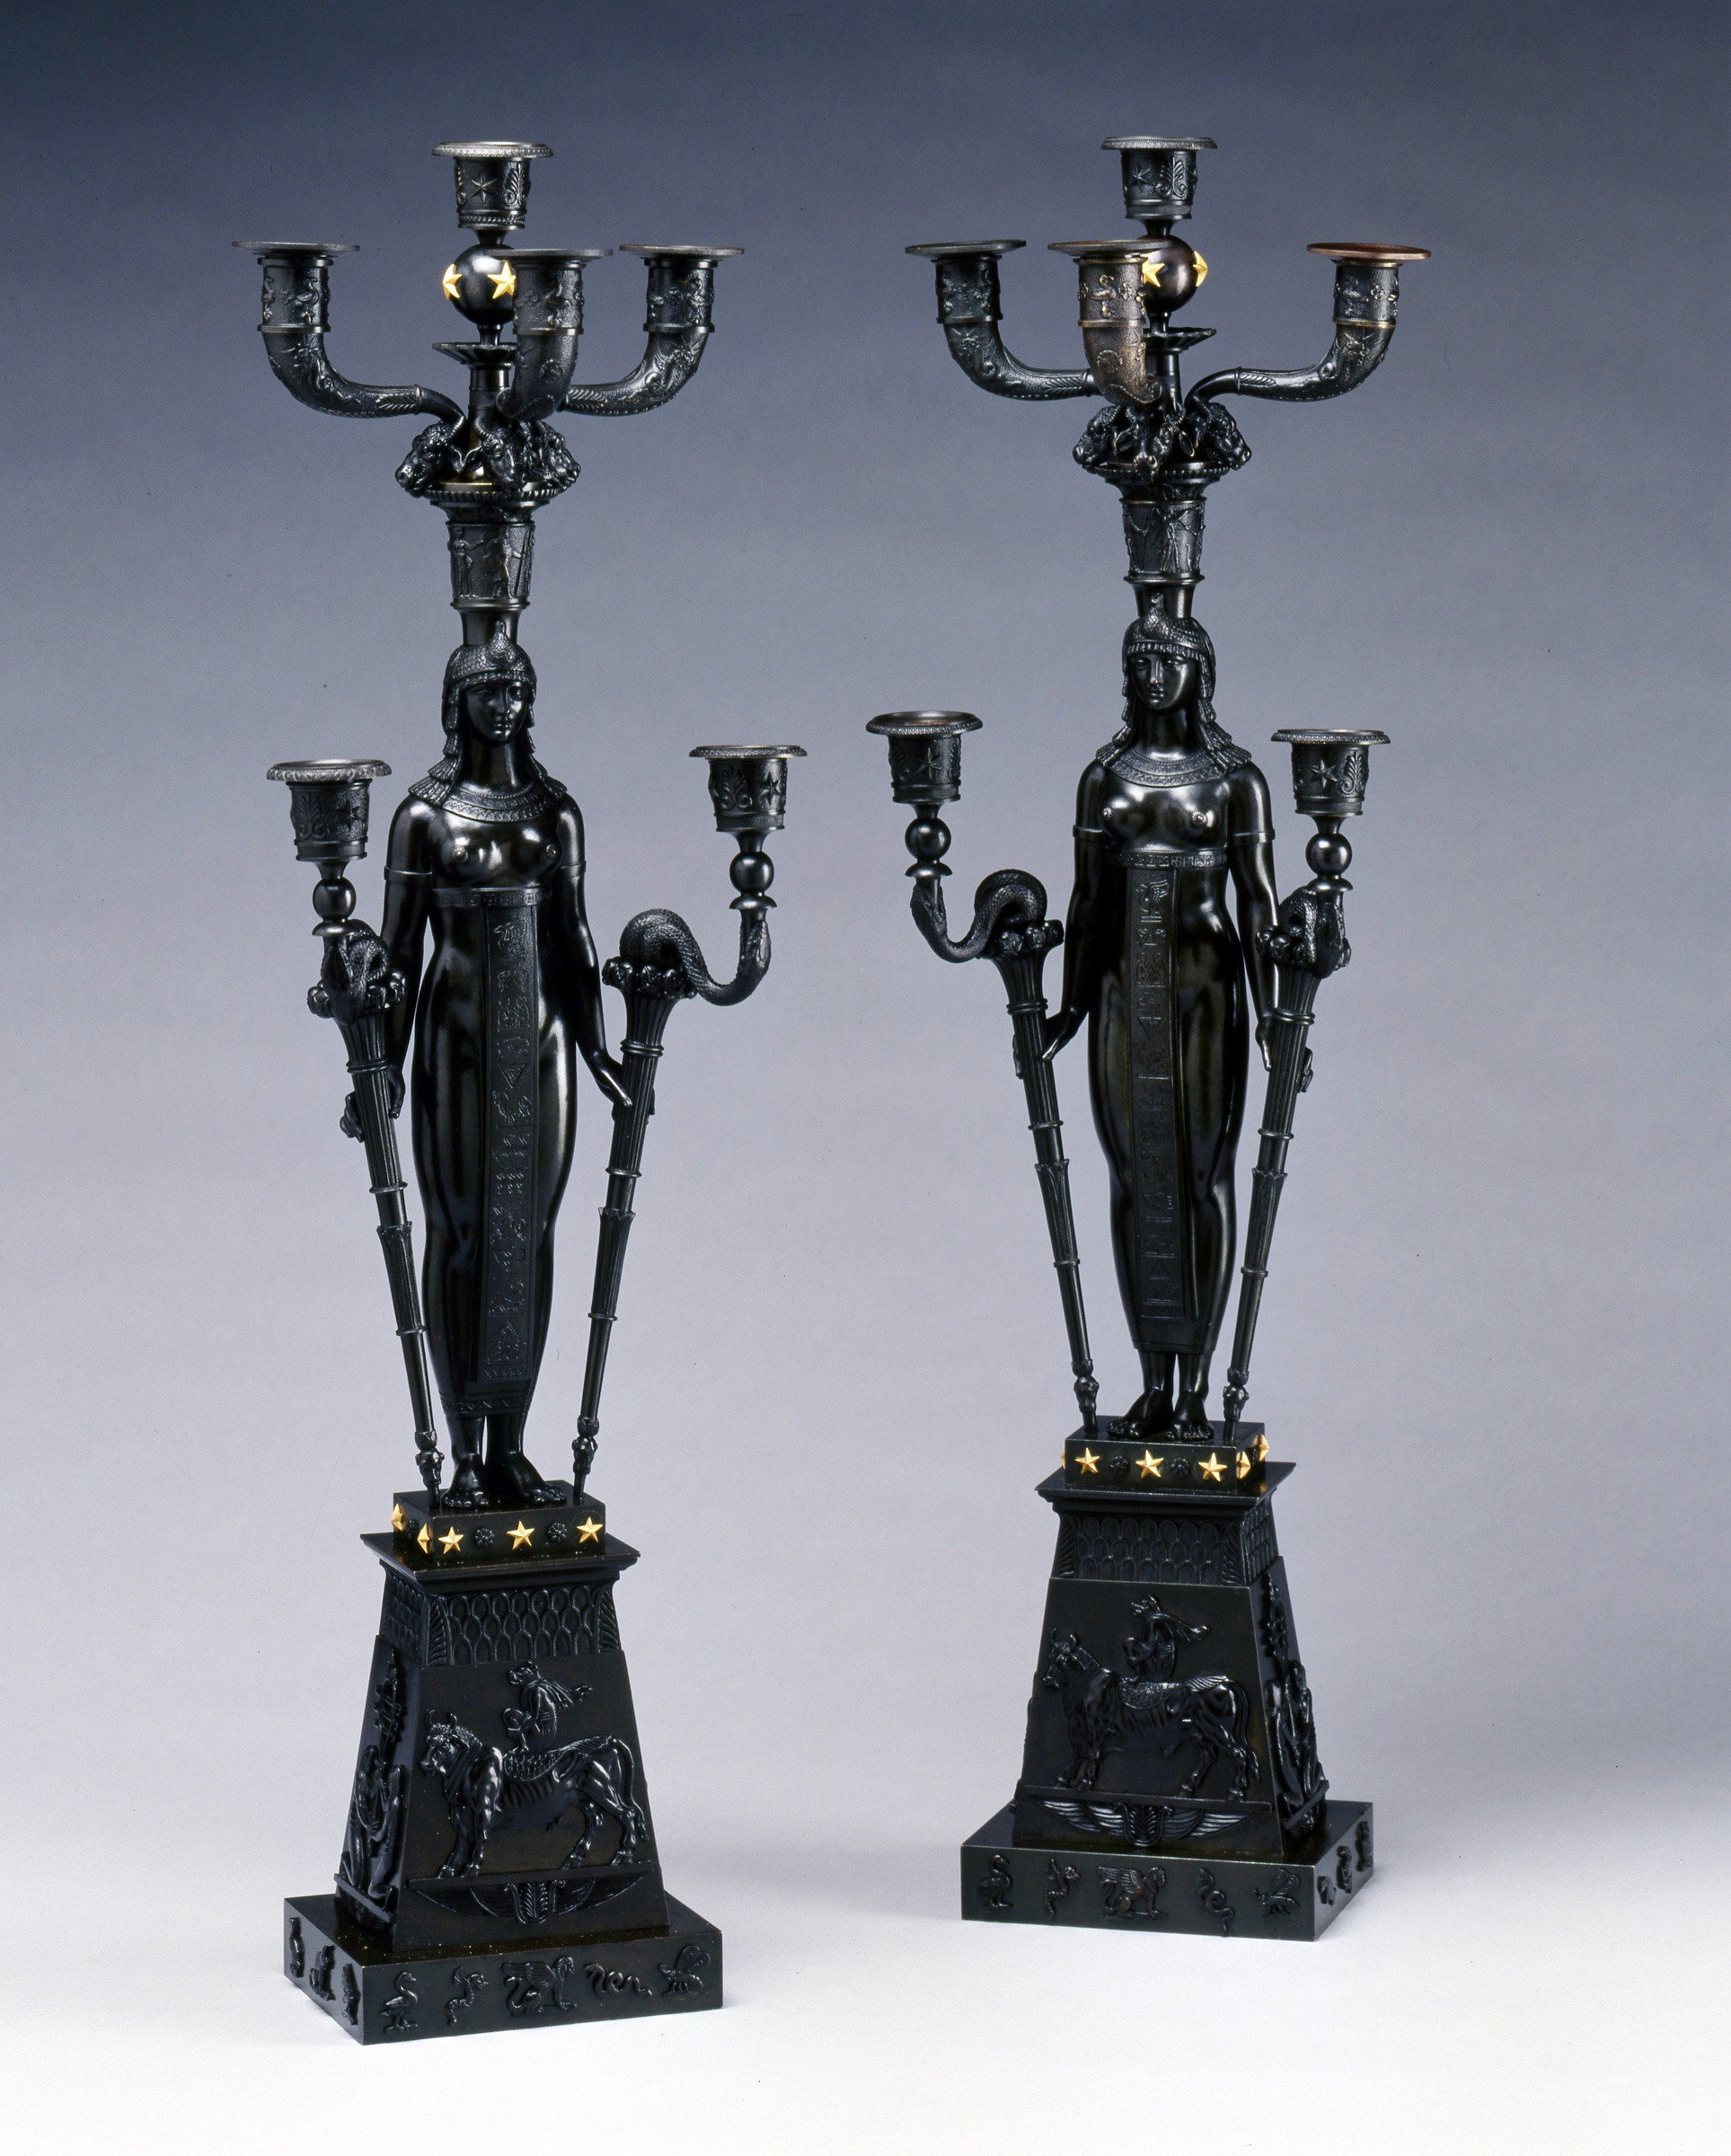 14 Perfect St Louis Crystal France Vase 2024 free download st louis crystal france vase of pierre philippe thomire attributed to a pair of empire six light with regard to a pair of empire six light candelabra attributed to pierre philippe thomire af